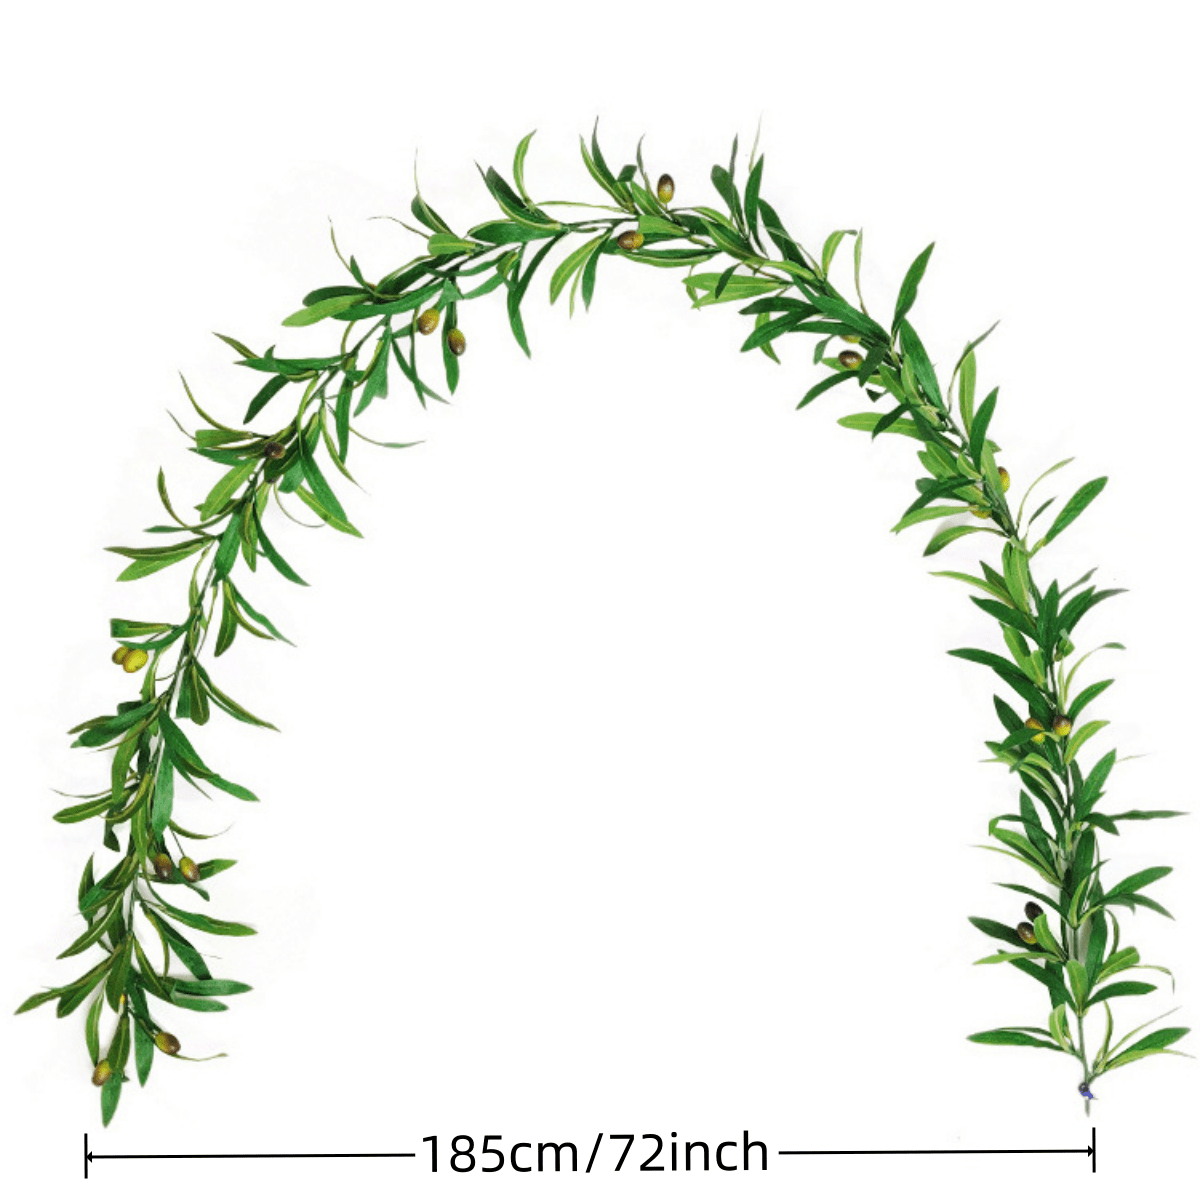 1pc Artificial Olive Leaf Vines, Olive Branch Greenery Garland With Fruit,  Ivy Vines Leaf Greenery Ornament For Home Garden Office Wedding Greenery De